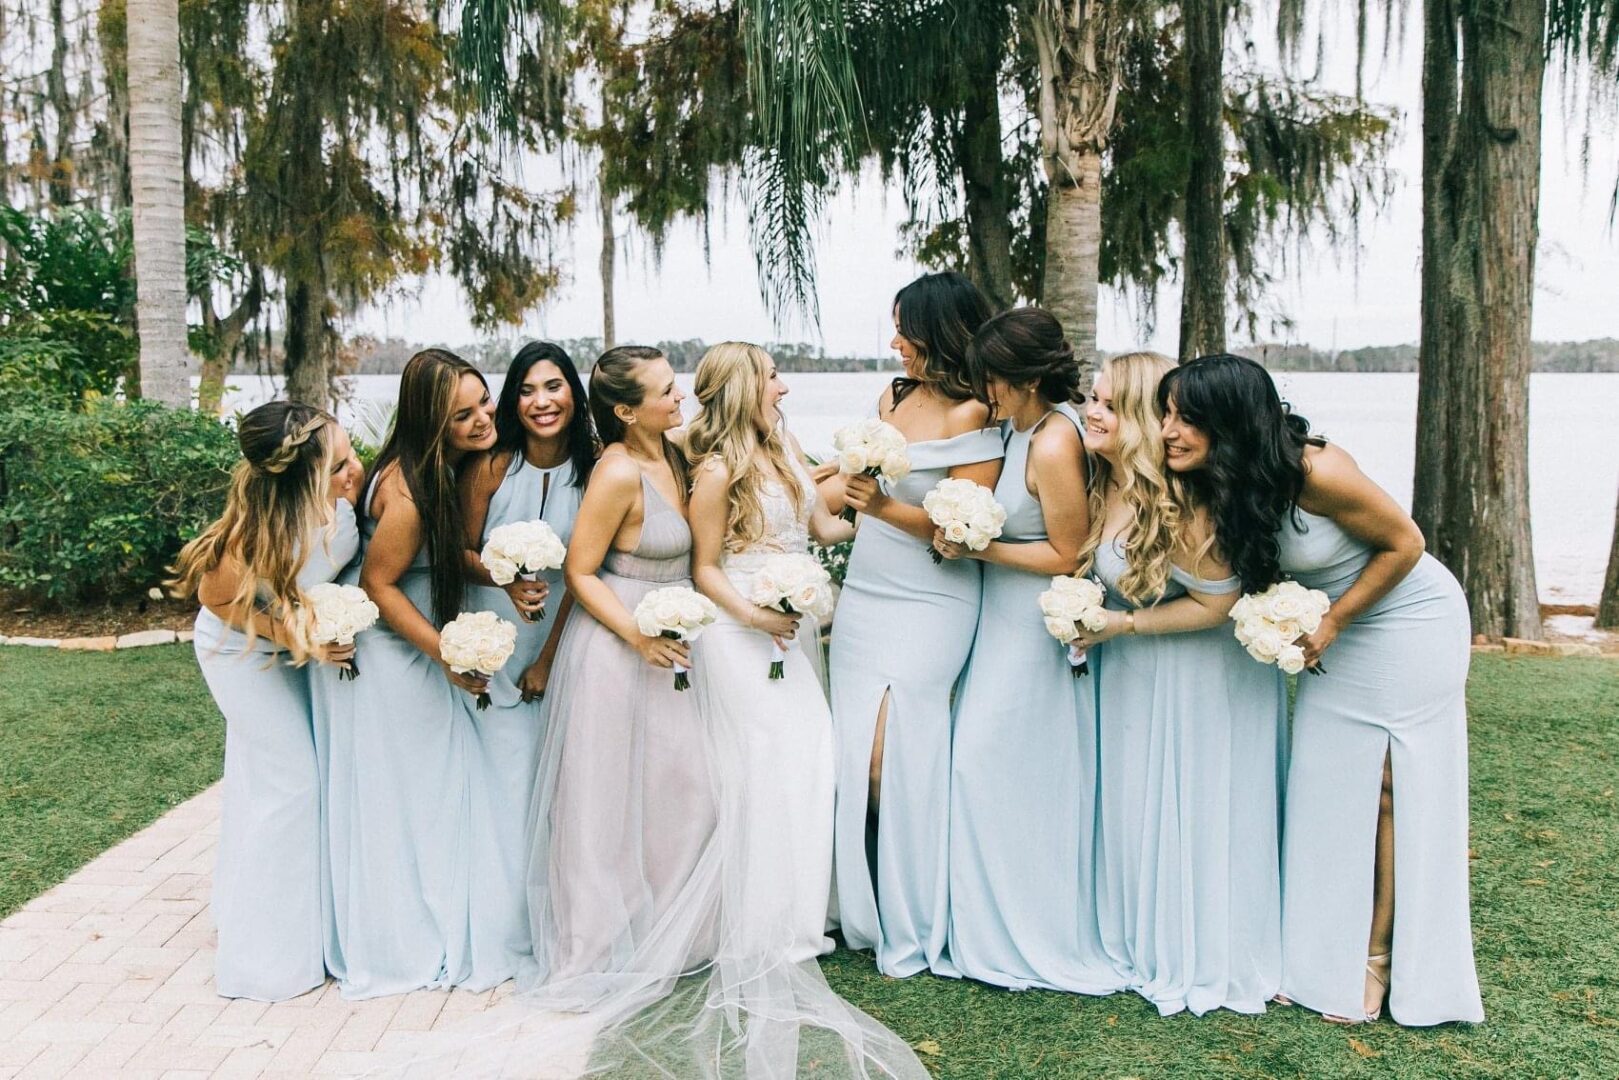 Brides With Bridesmaids in Blue Dresses